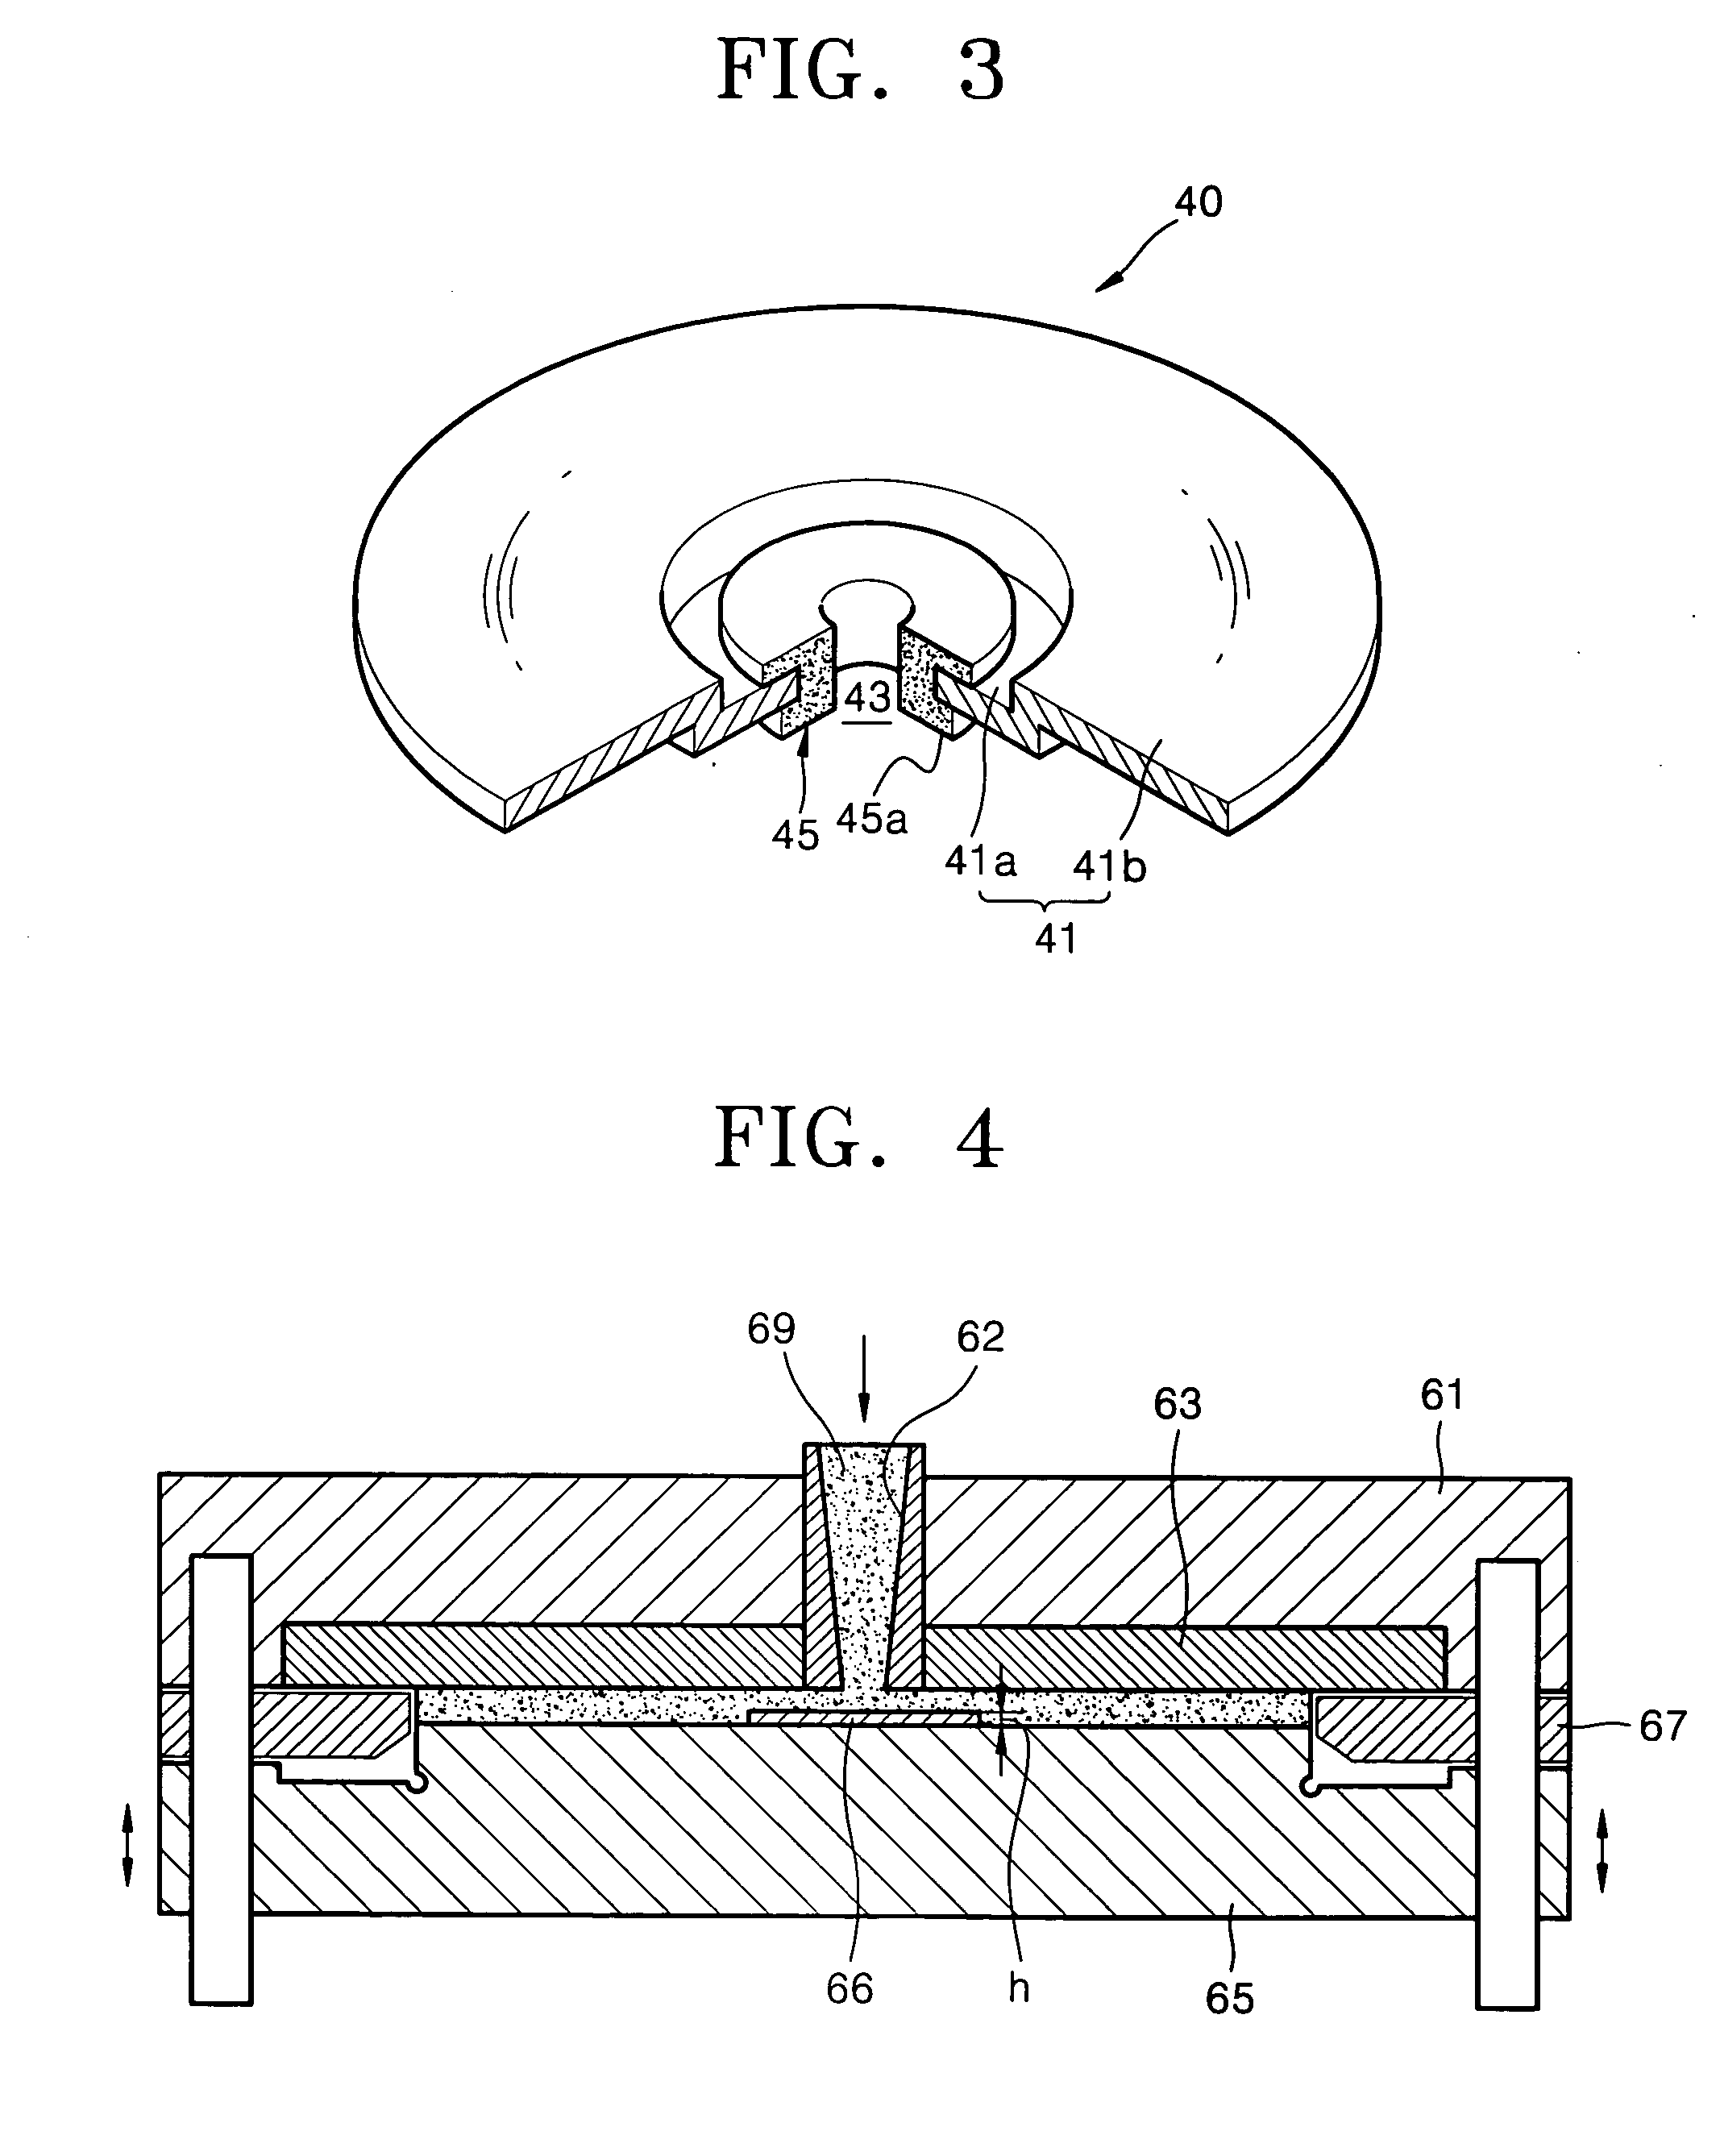 Hub-mounted optical disk, method for fabricating optical disk, and injection molding die for manufacturing optical disk substrate